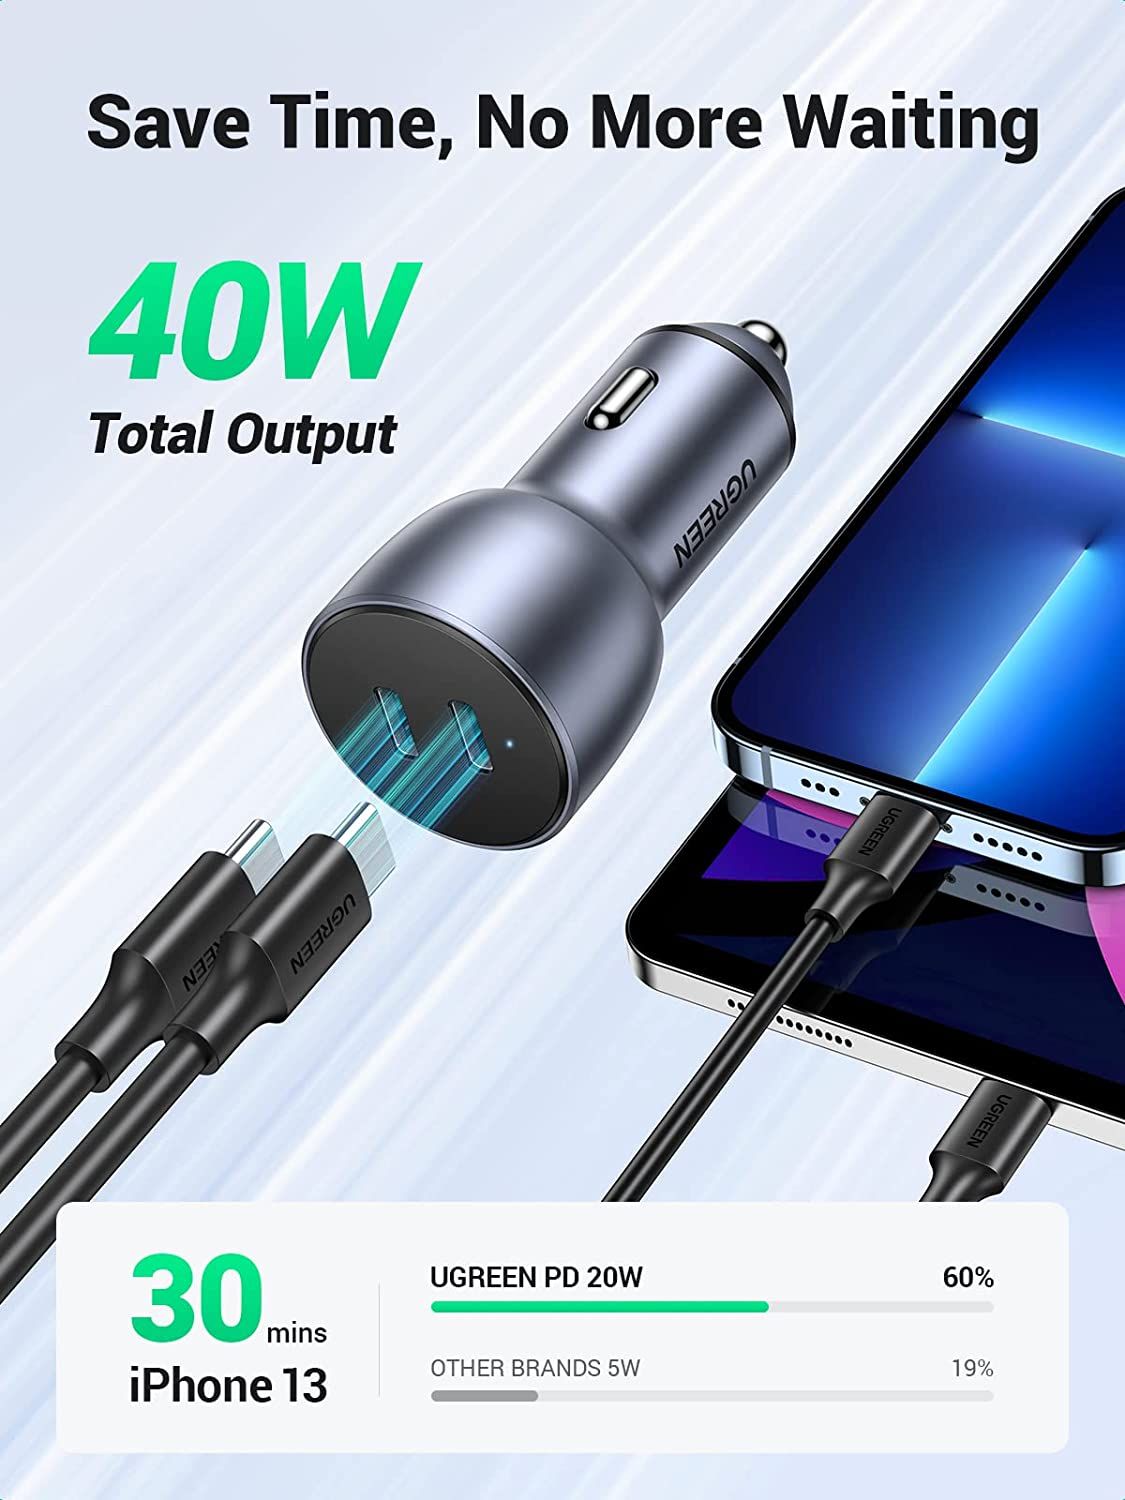 instock] UGREEN USB C Car Charger Fast Charging - 40W Dual USB C Car  Charger Adapter, PD Type C Car Charger Compatible with iPhone 13/13  Pro/12/11/X/SE,Galaxy S21/S20/Note20, iPad, Pixel 5/5a, Mobile Phones